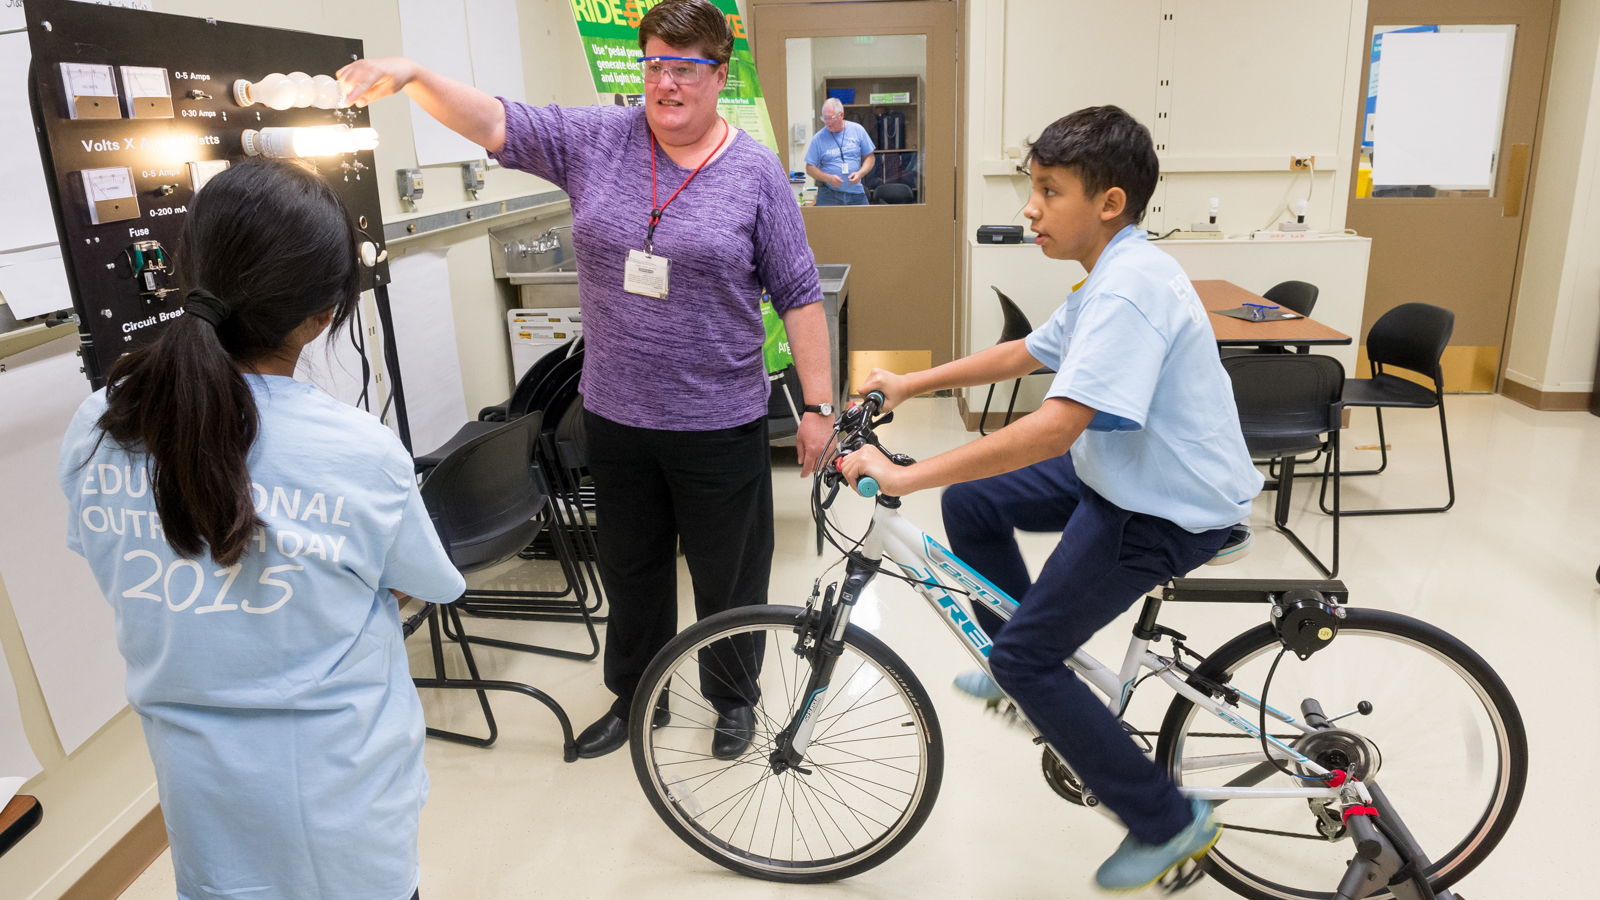 Seventh-grade students peddling bicycle to power various types of lightbulbs as part of an introduction to science and Argonne National Laboratory.